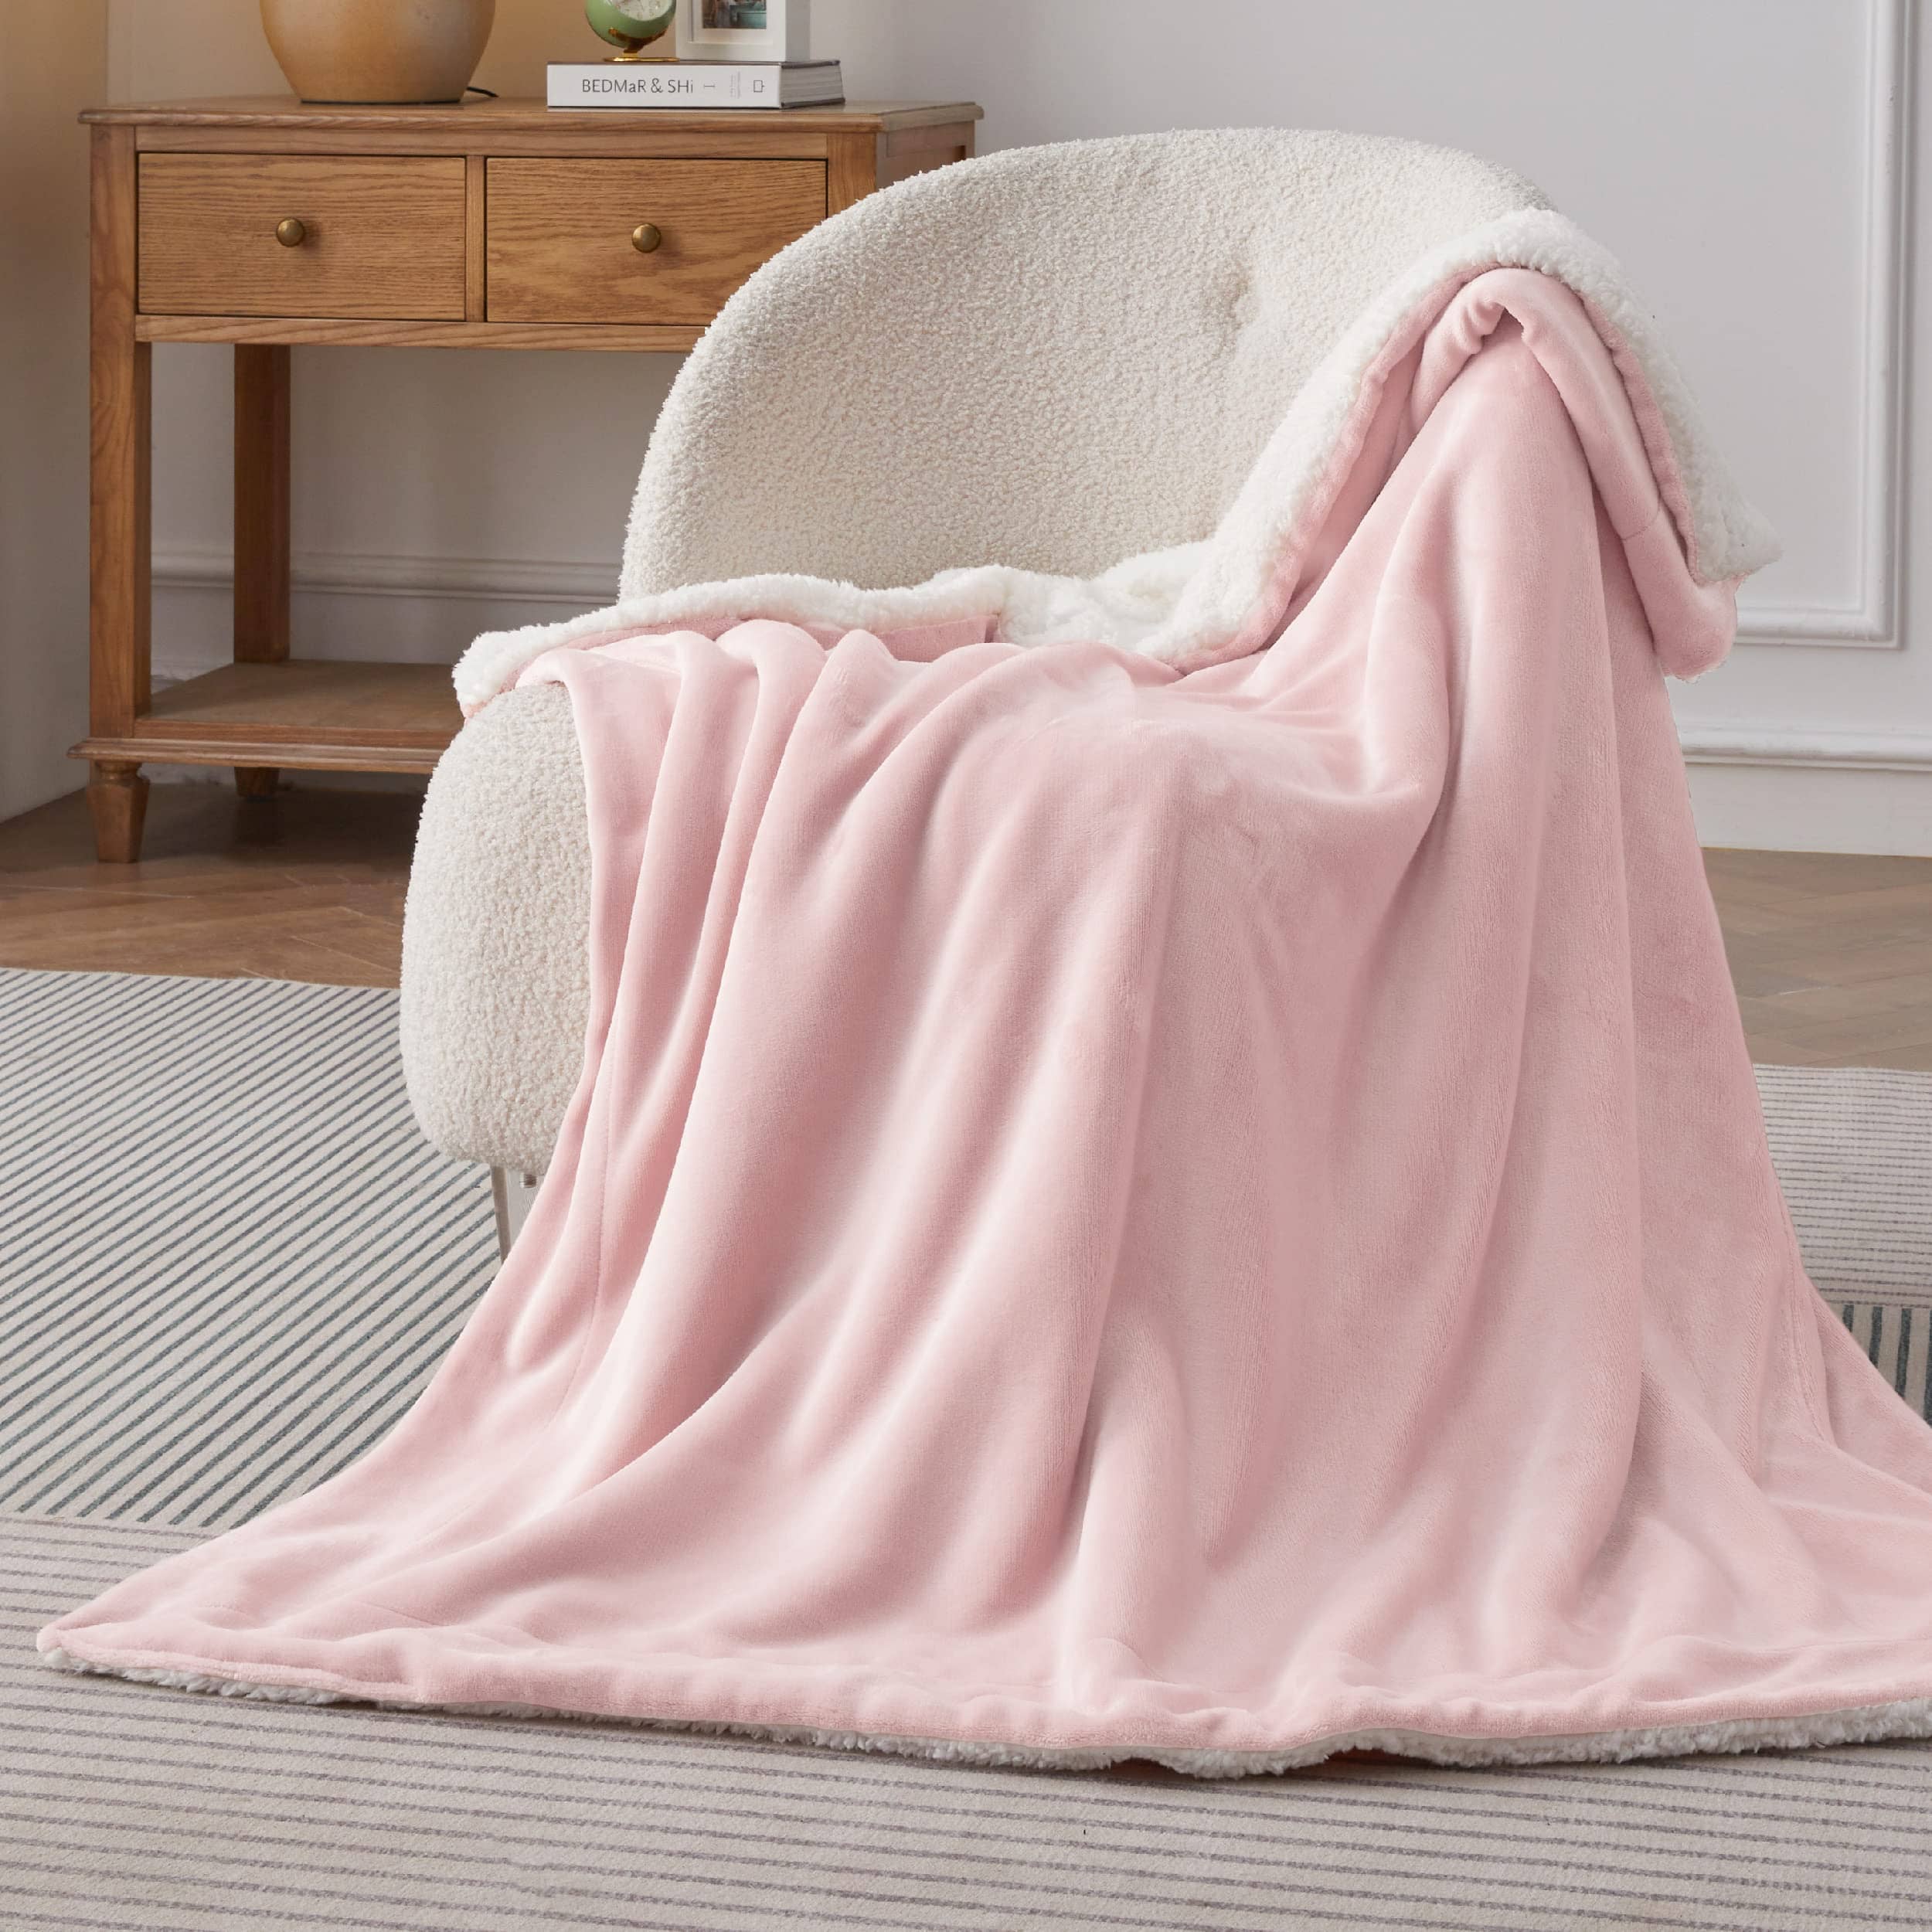 Bedsure Electric Heated Blanket with Foot Pocket